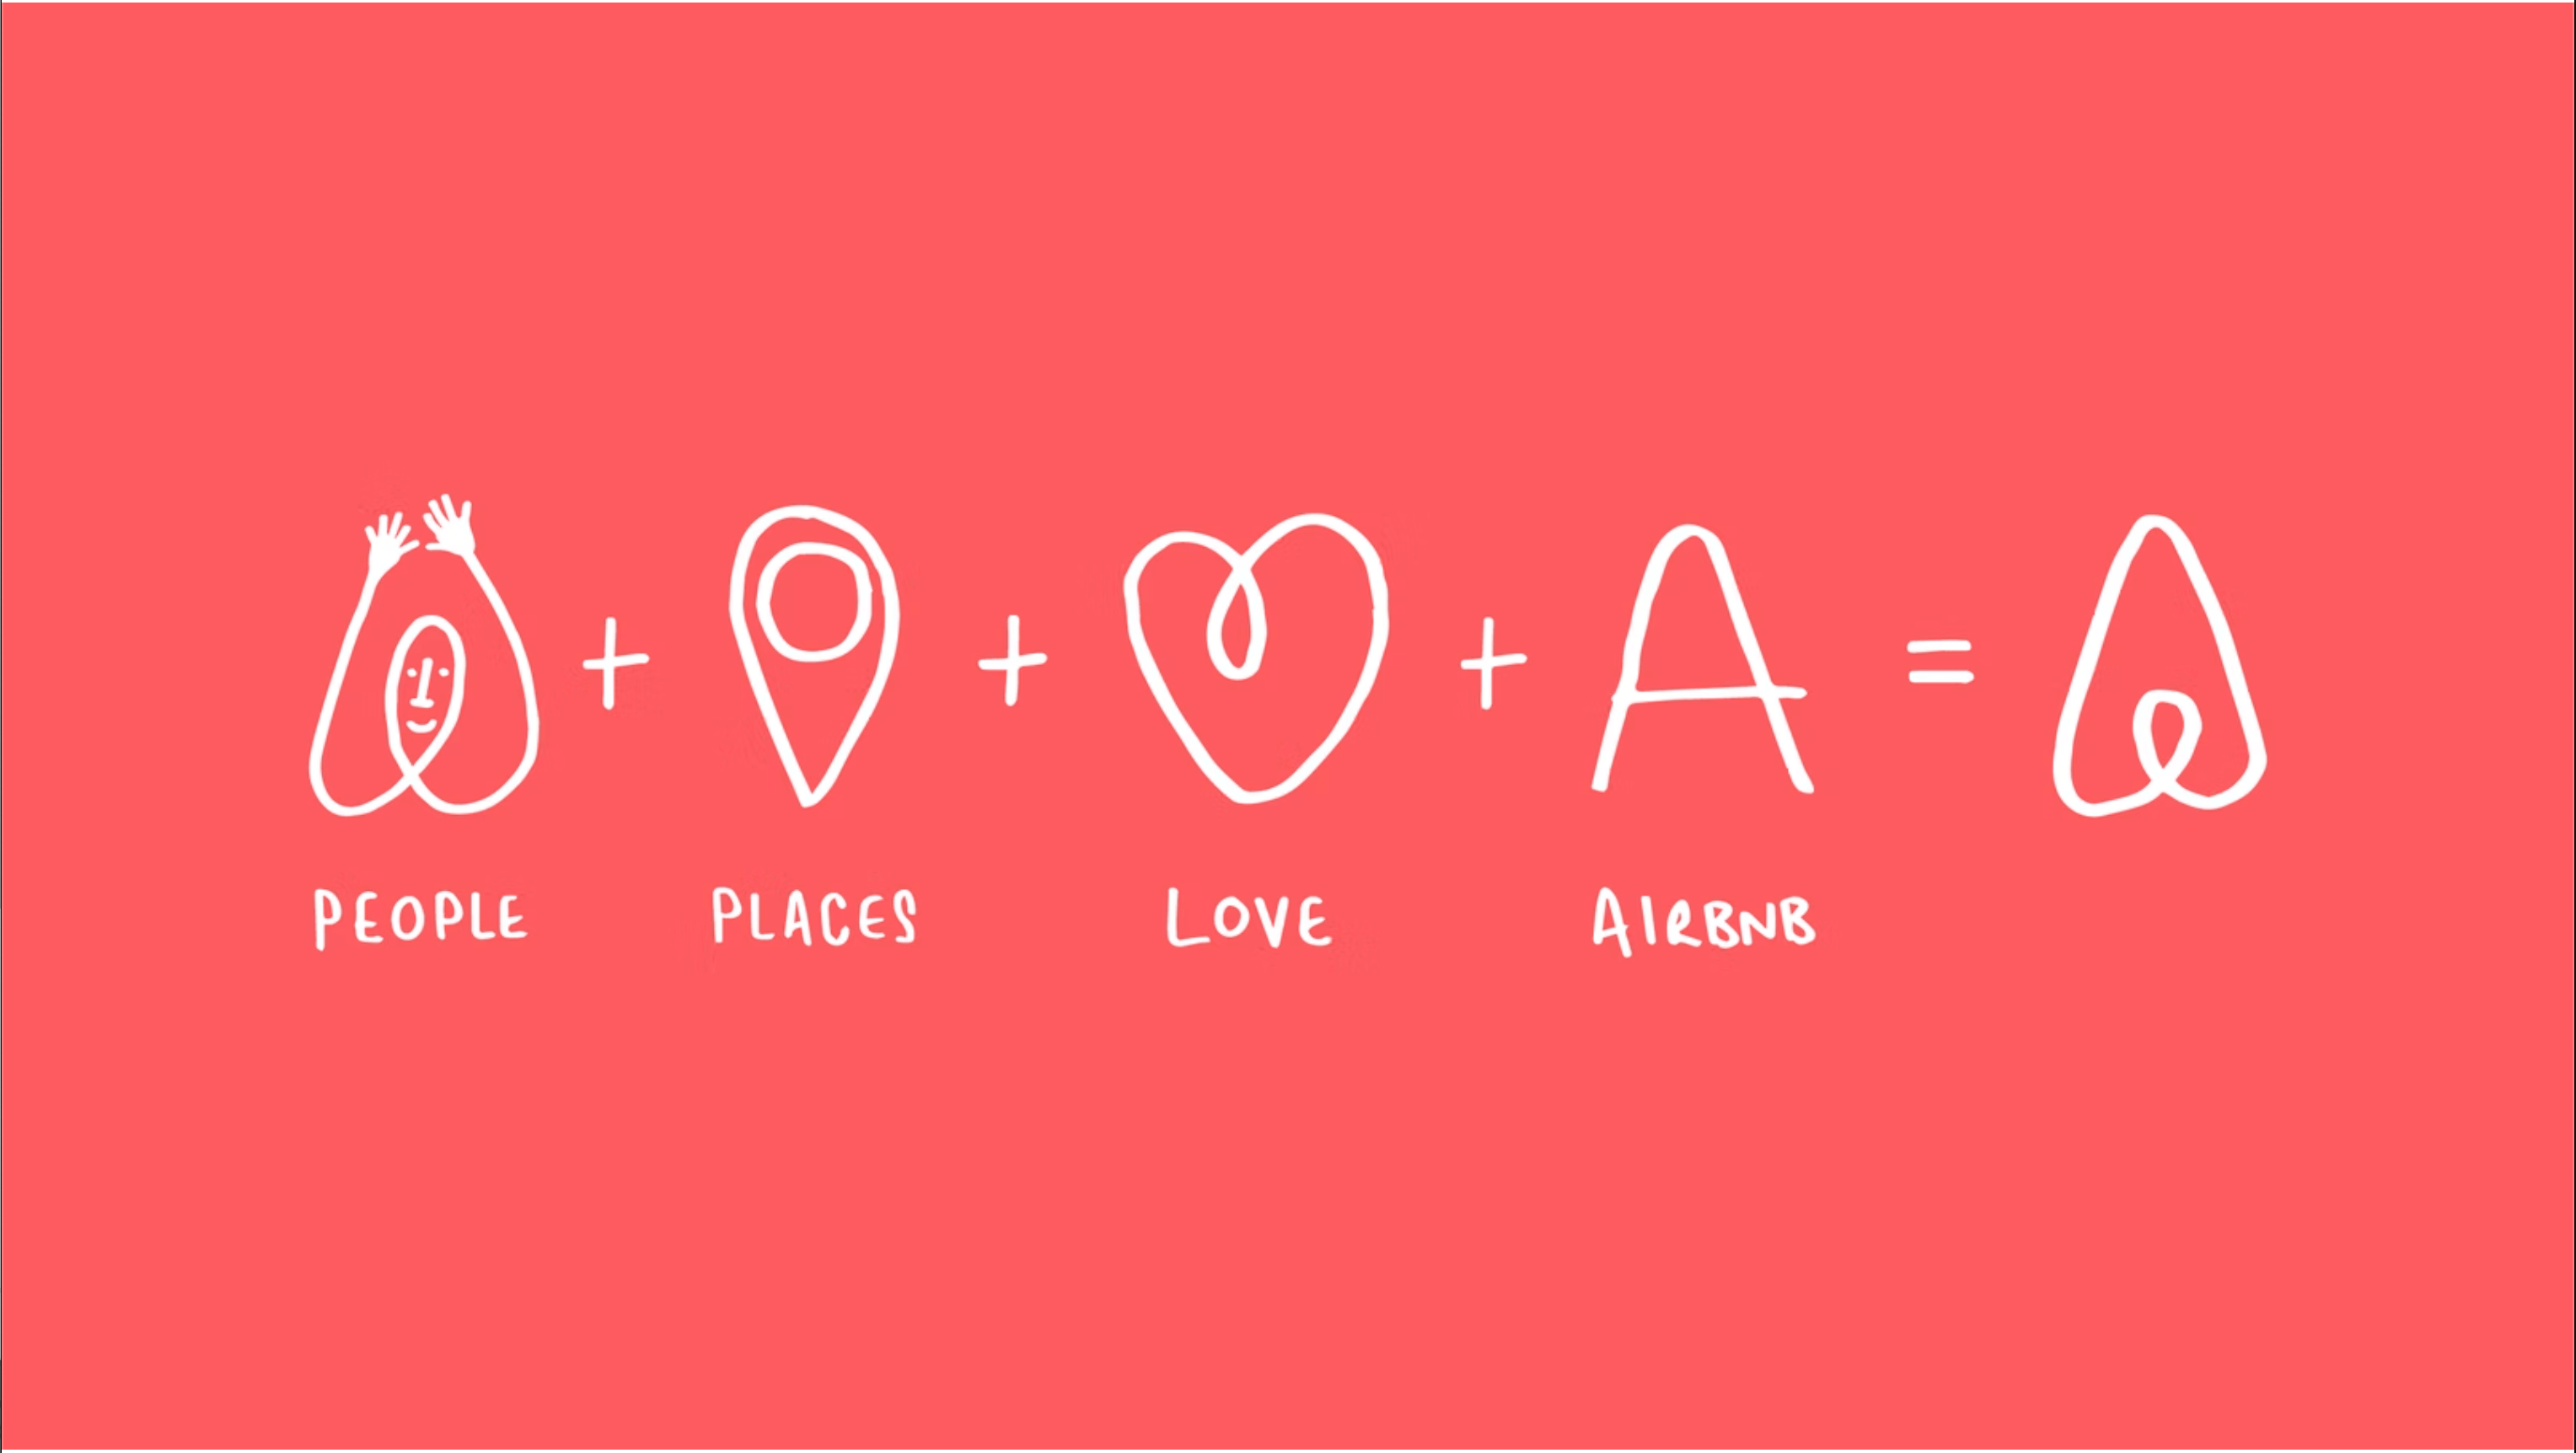  A sketch from AirBnB's brand style guide explaining their logo. People + Places + Love + A for AirBnB = Logo